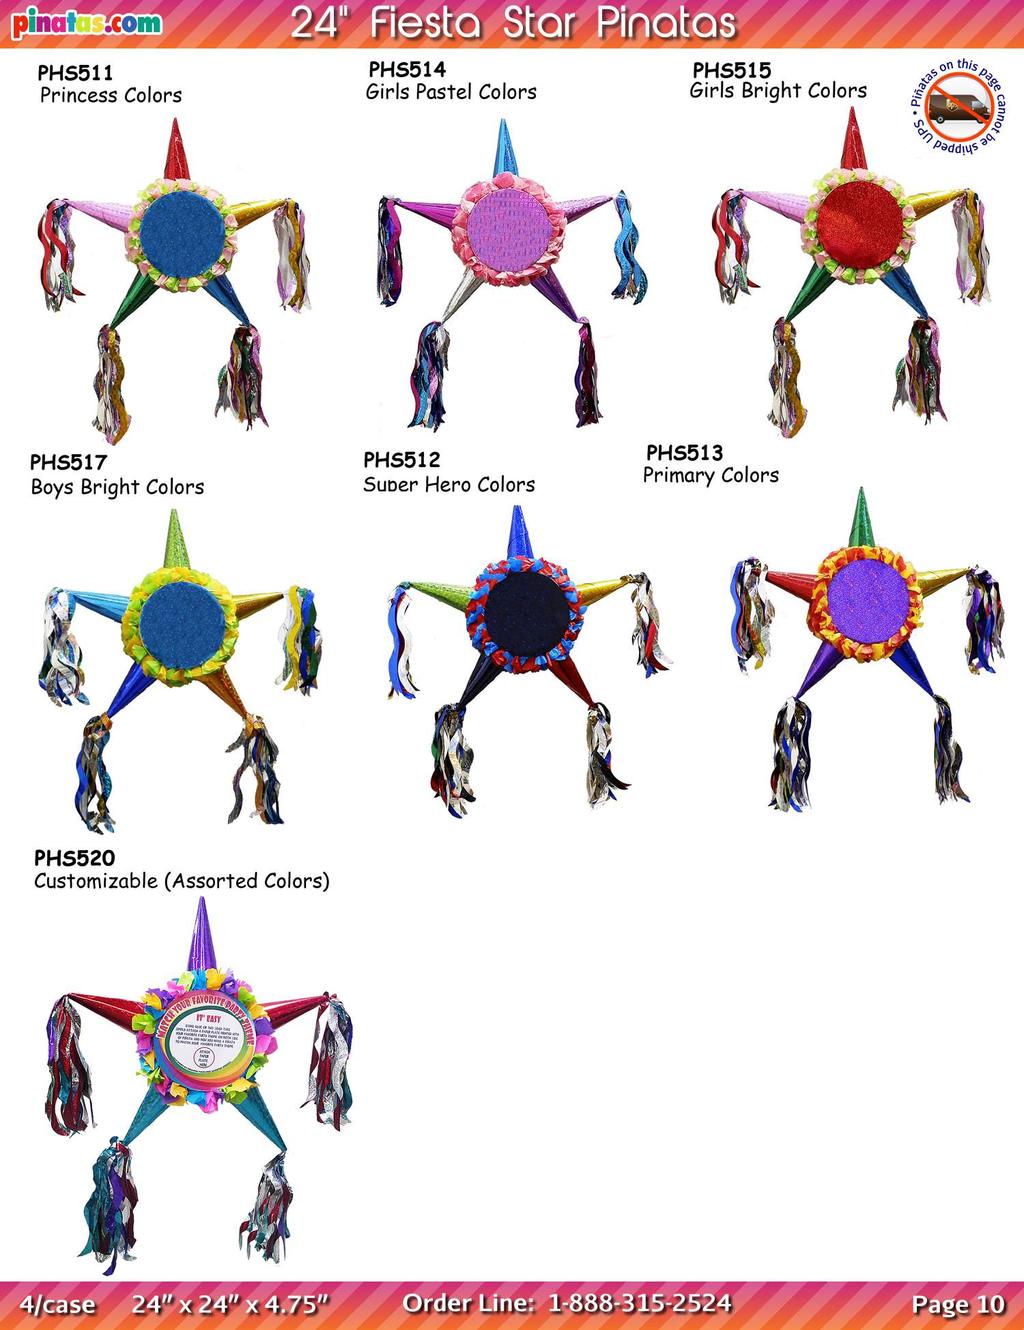 24" Fiesta Star Pinatas PHS520 Customizable (Assorted Colors) 4/case Page 24 24 4/case x 24 x